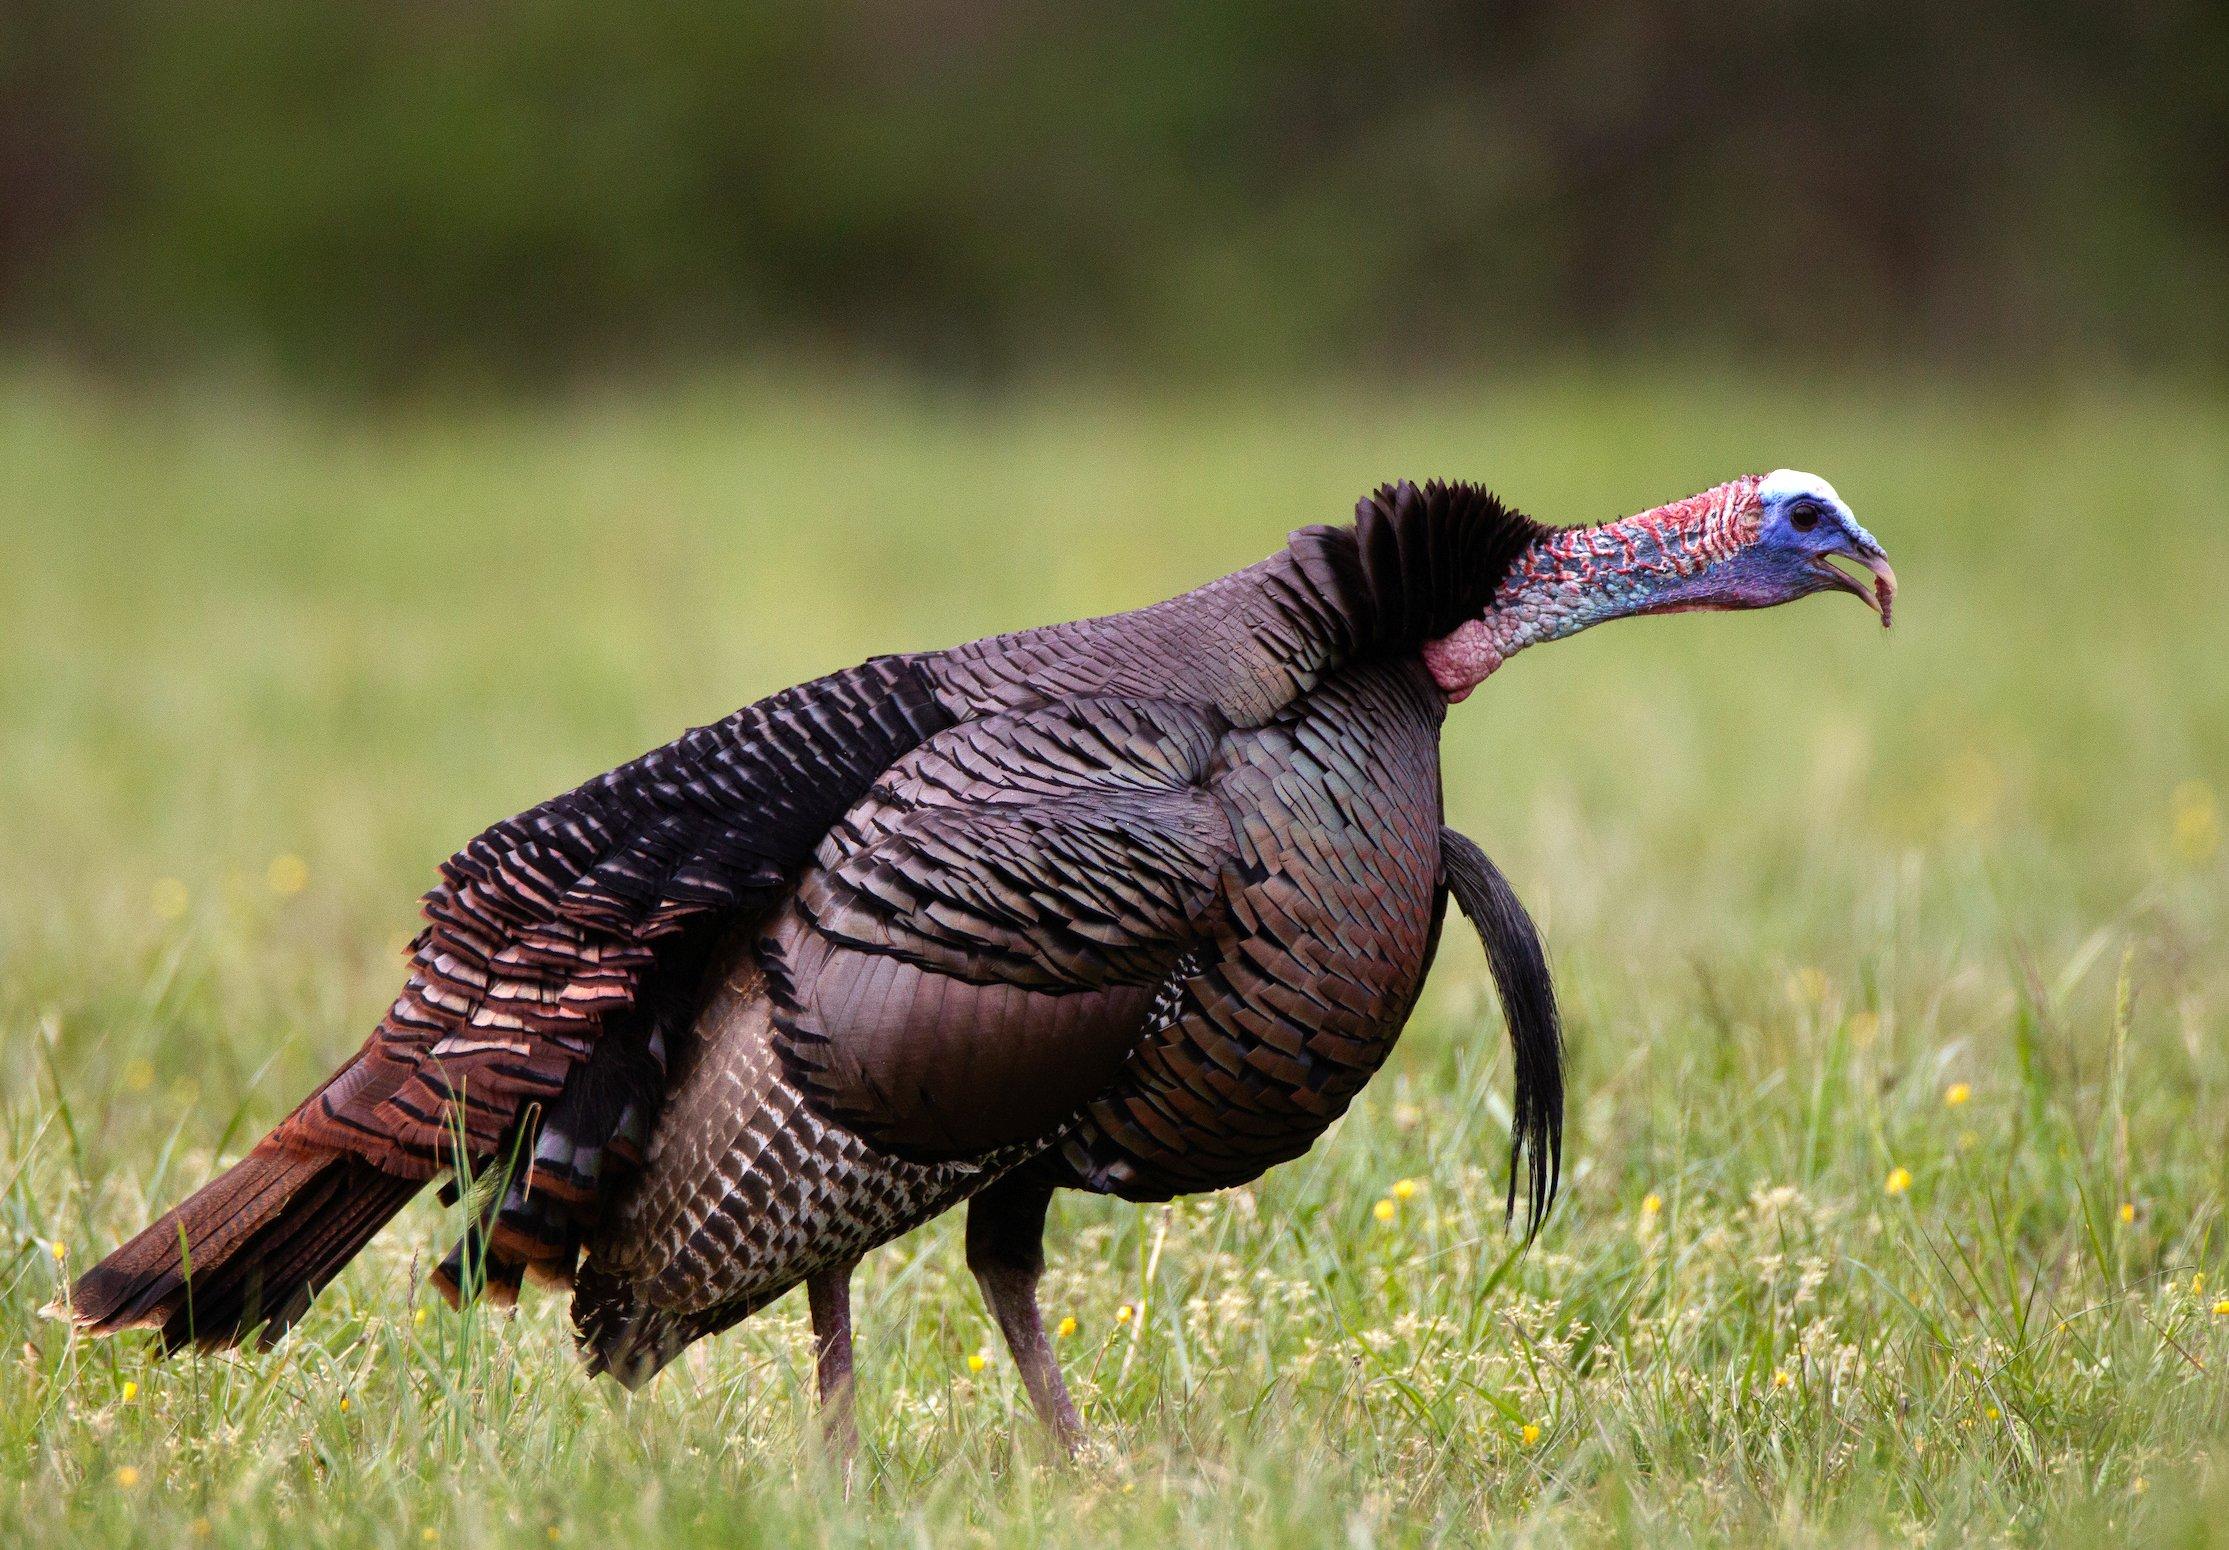 Turkey hunting isn't easy, but getting creative with calling can boost your success. Image by Russell Graves